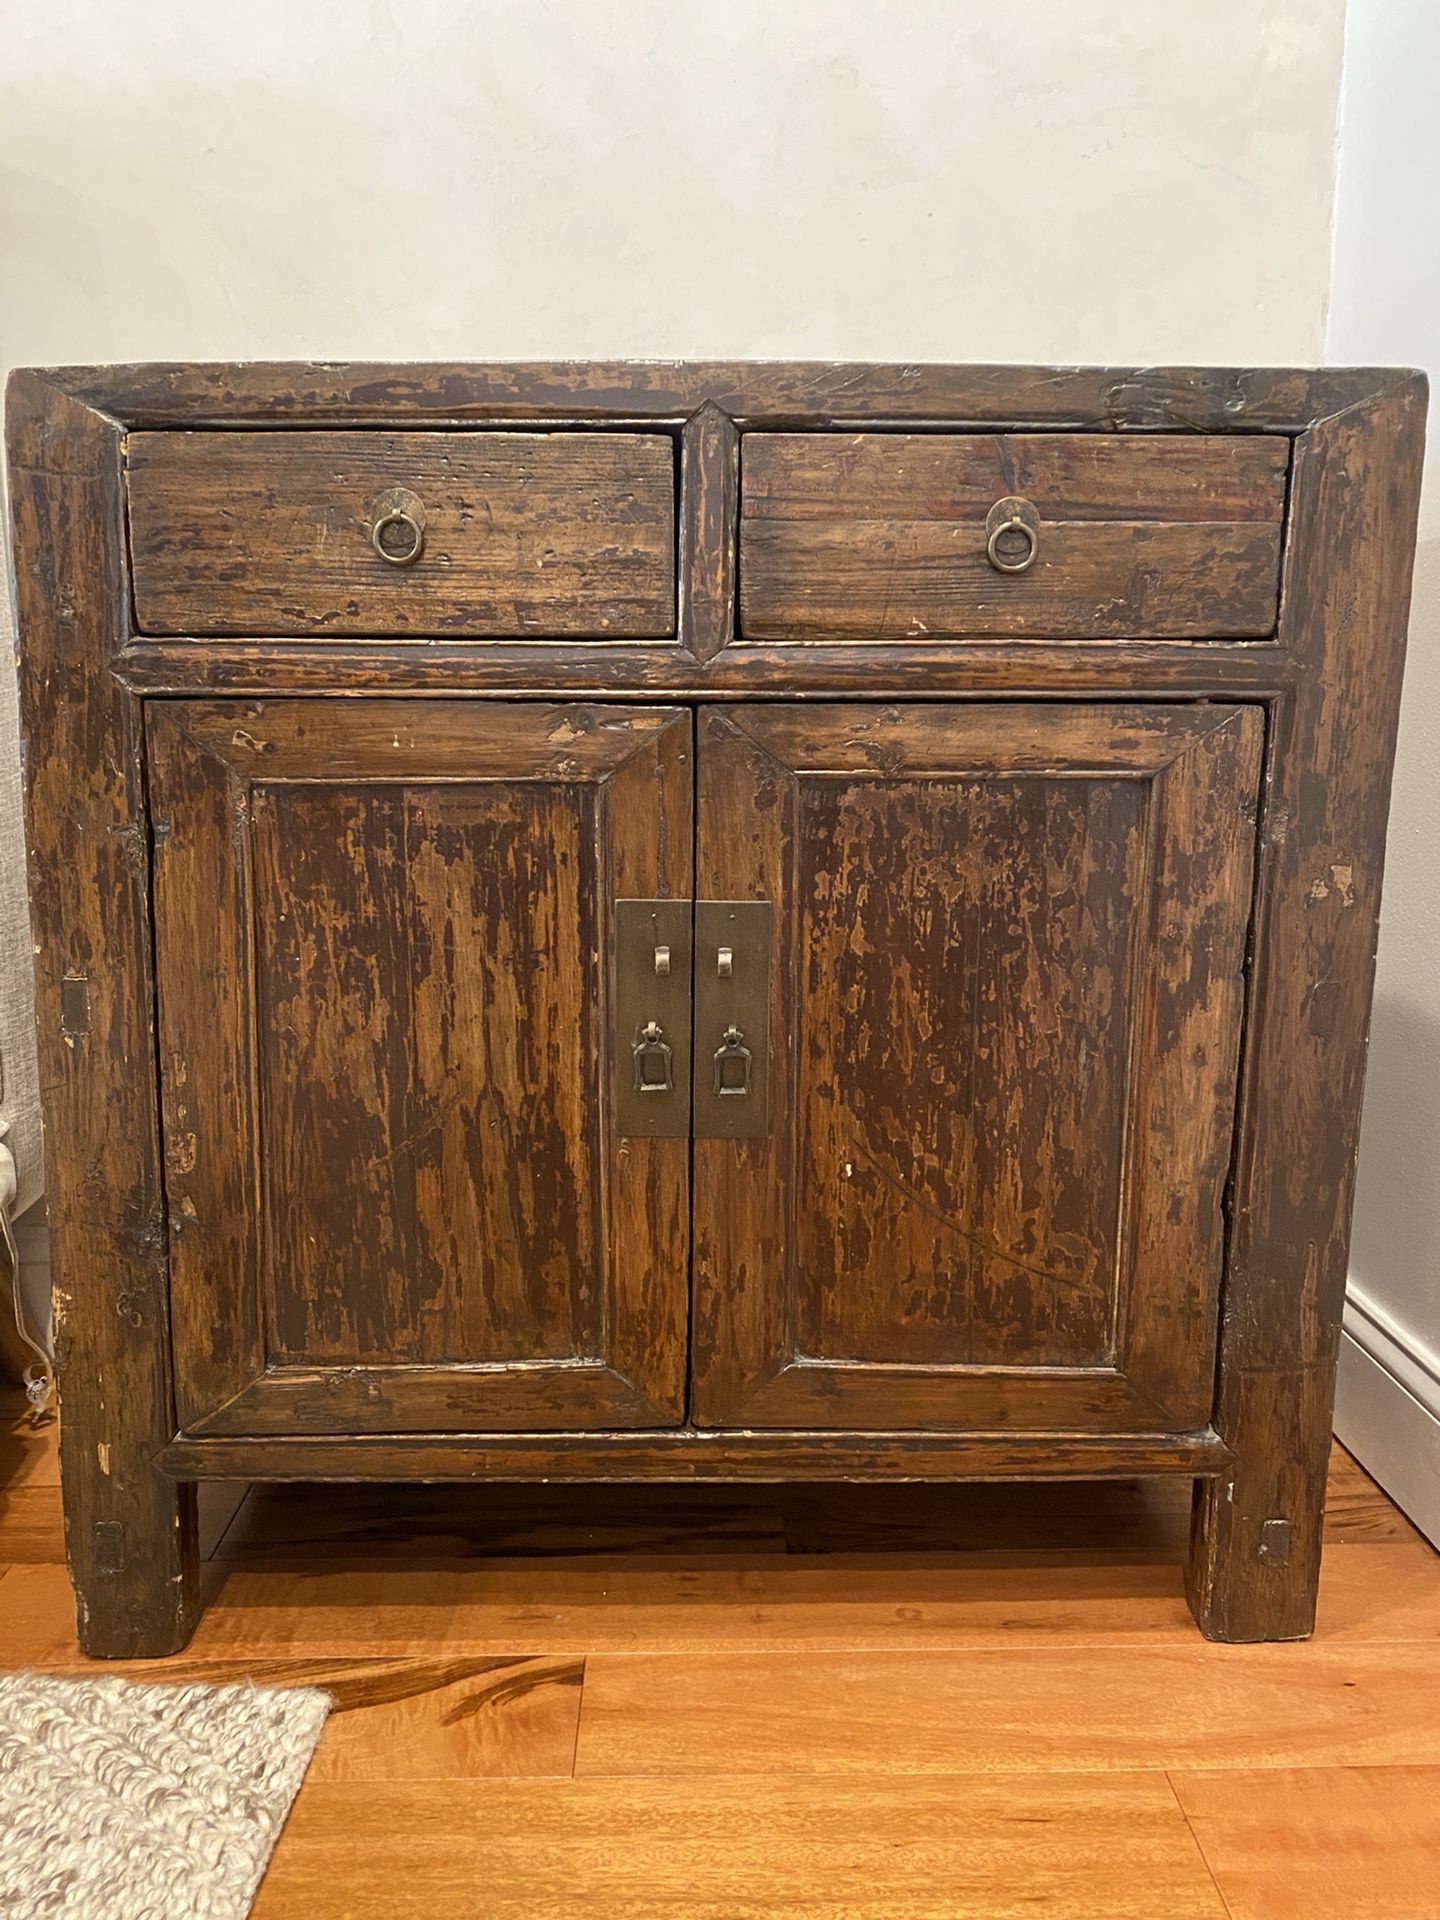 Antique Chinese Cabinet with Drawers